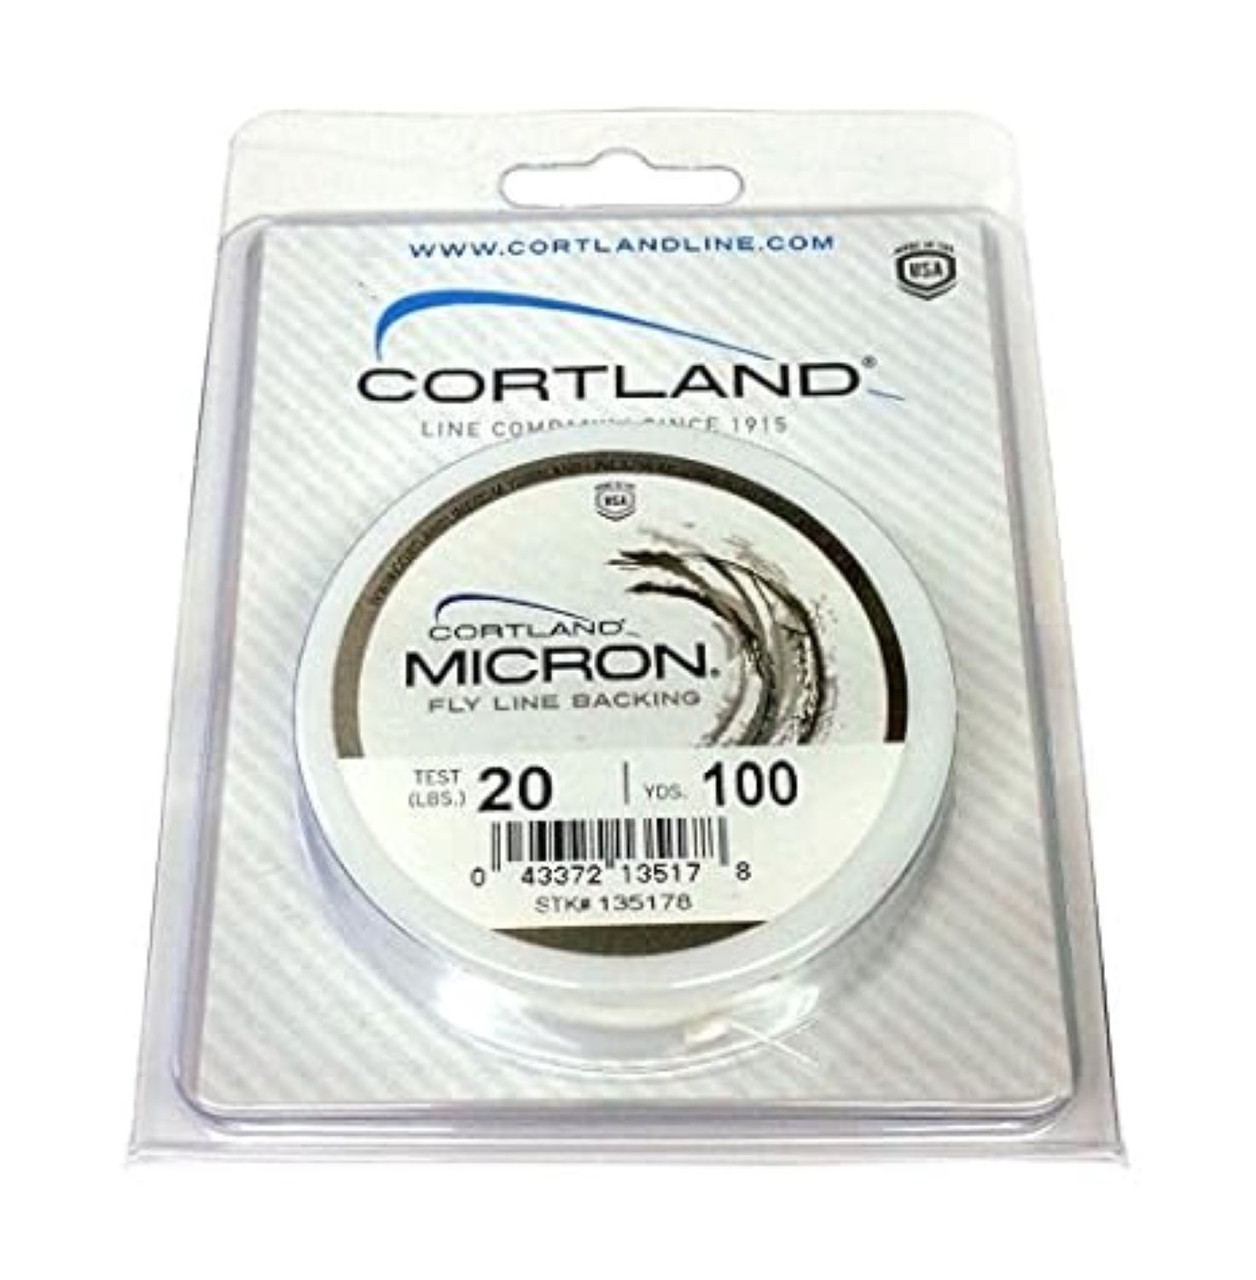 Cortland Micron Fly Line Backing, 30 Lb, 250 Yds, White - 135222